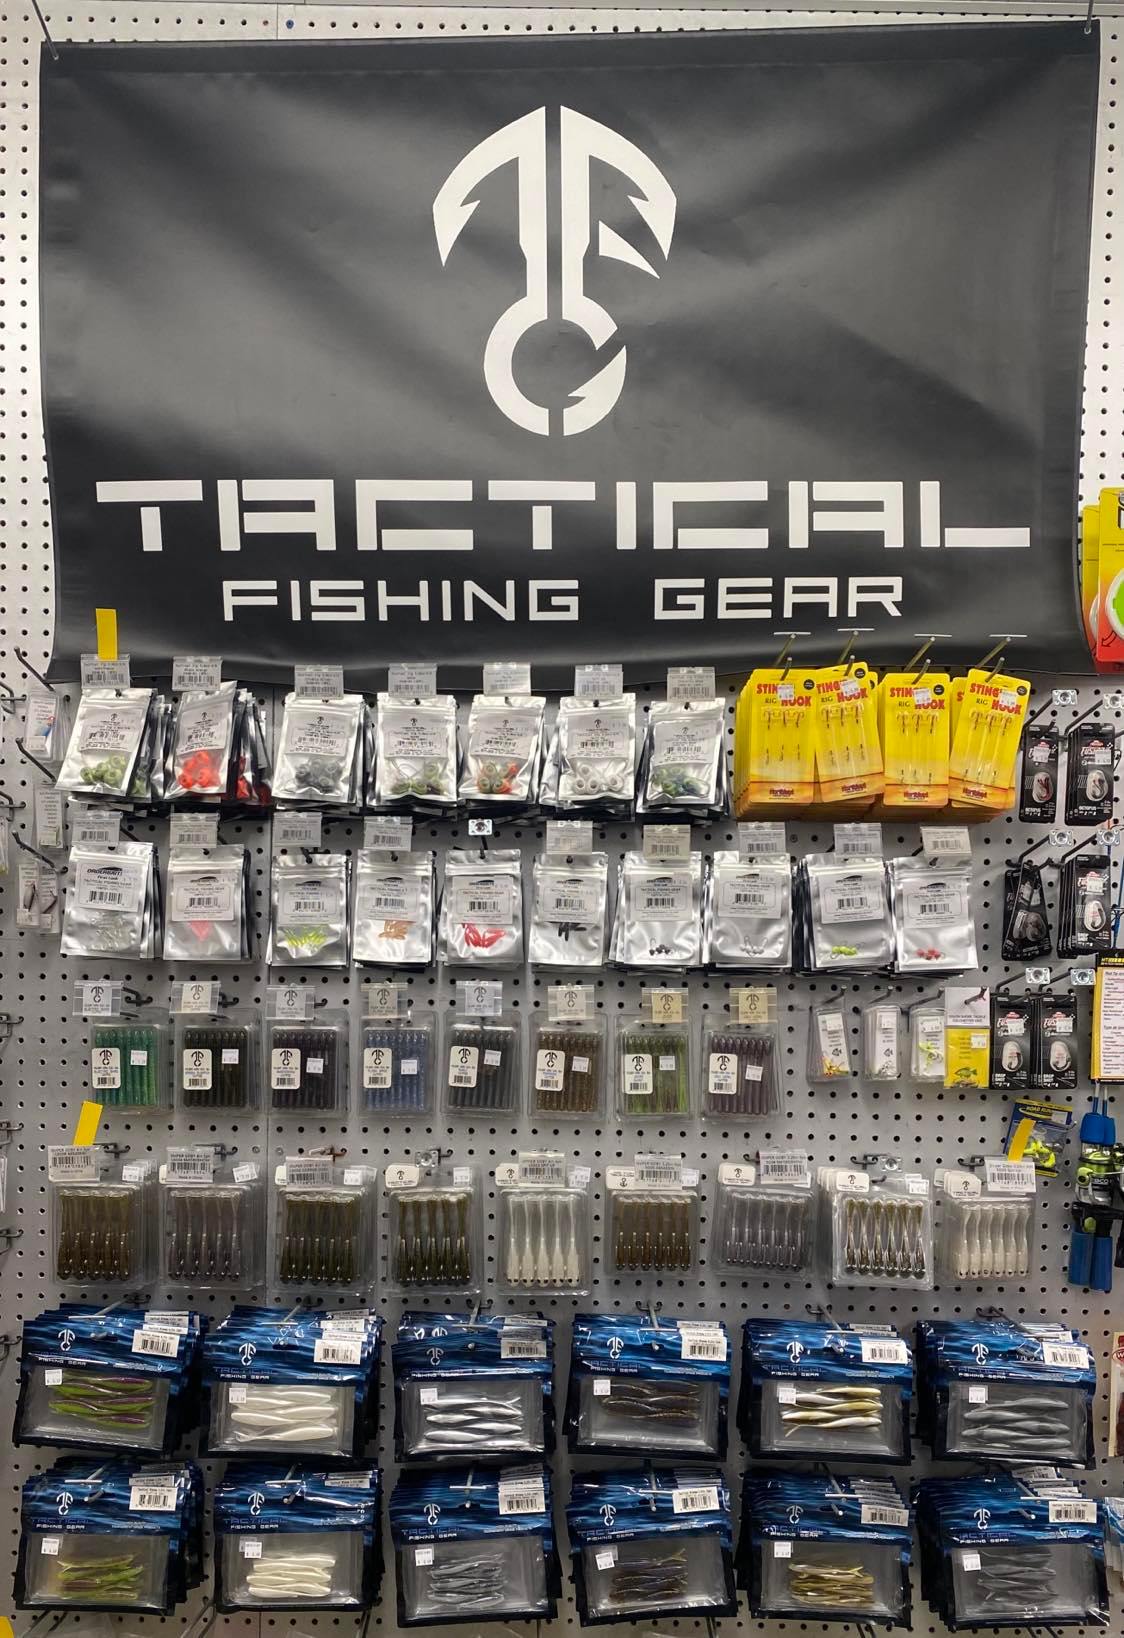 Tactical Fishing Gear - SPH Motorsports